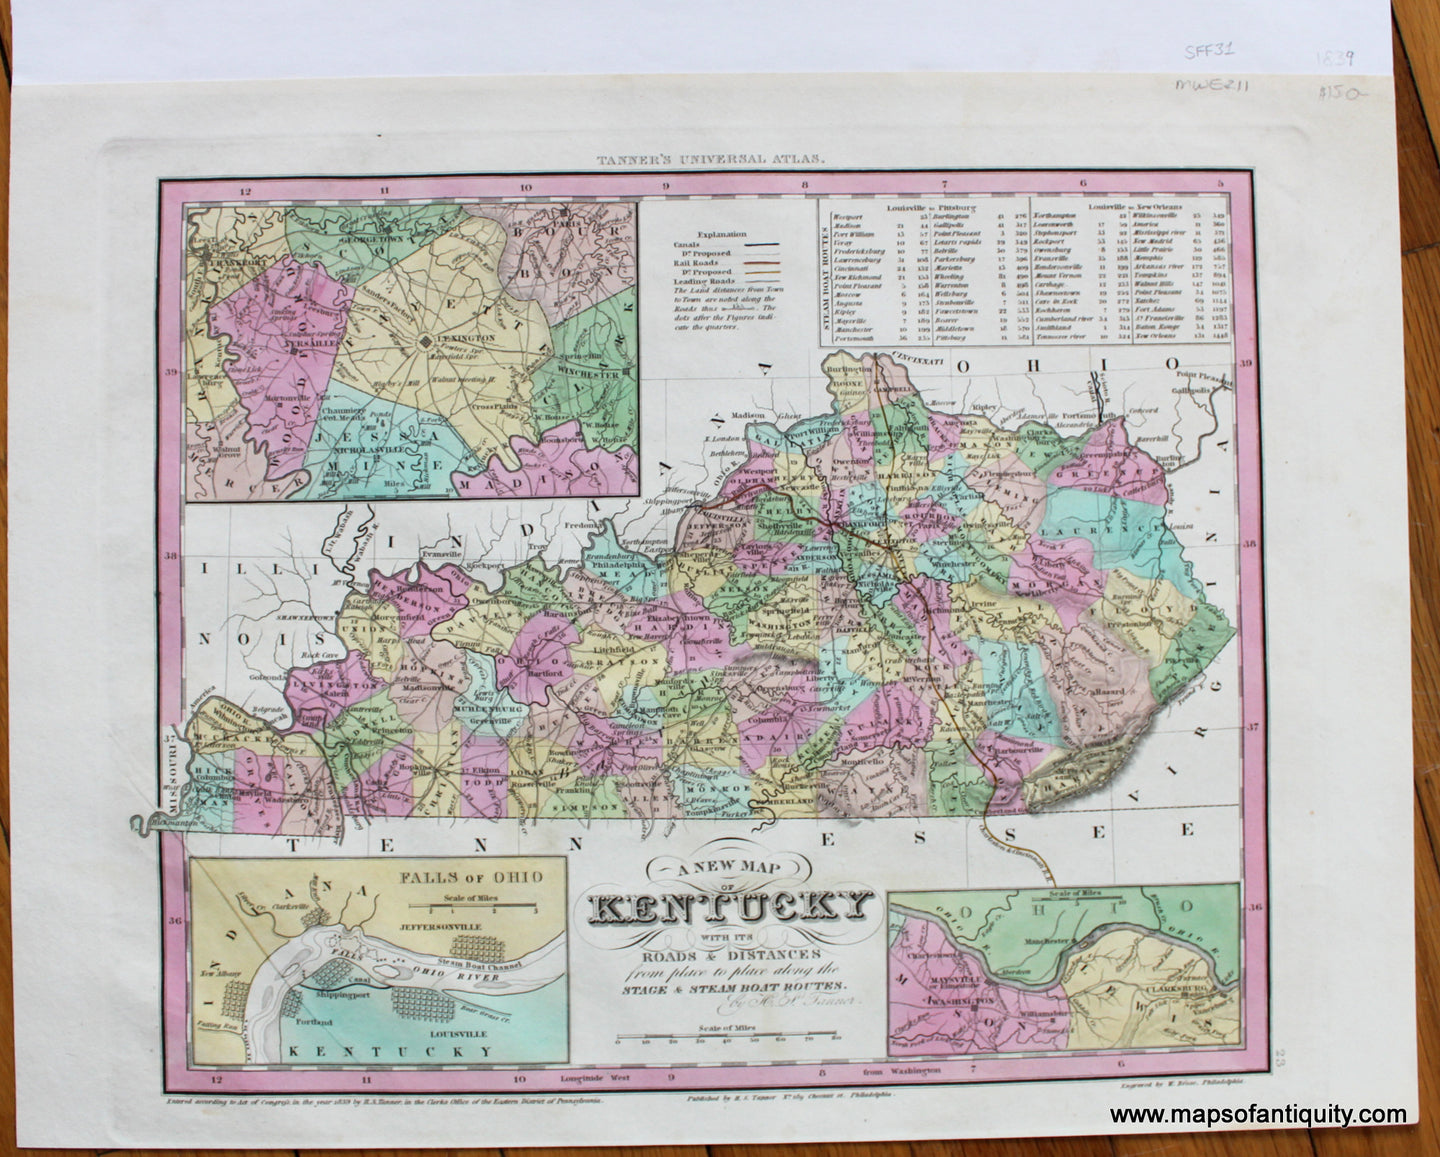 Antique-Hand-Colored-Engraved-Map-A-New-Map-of-Kentucky-with-its-Roads-&-Distances-from-place-to-place-along-the-Stage-&-Steam-Boat-Routes.-United-States-Kentucky-1839-Tanner-Maps-Of-Antiquity